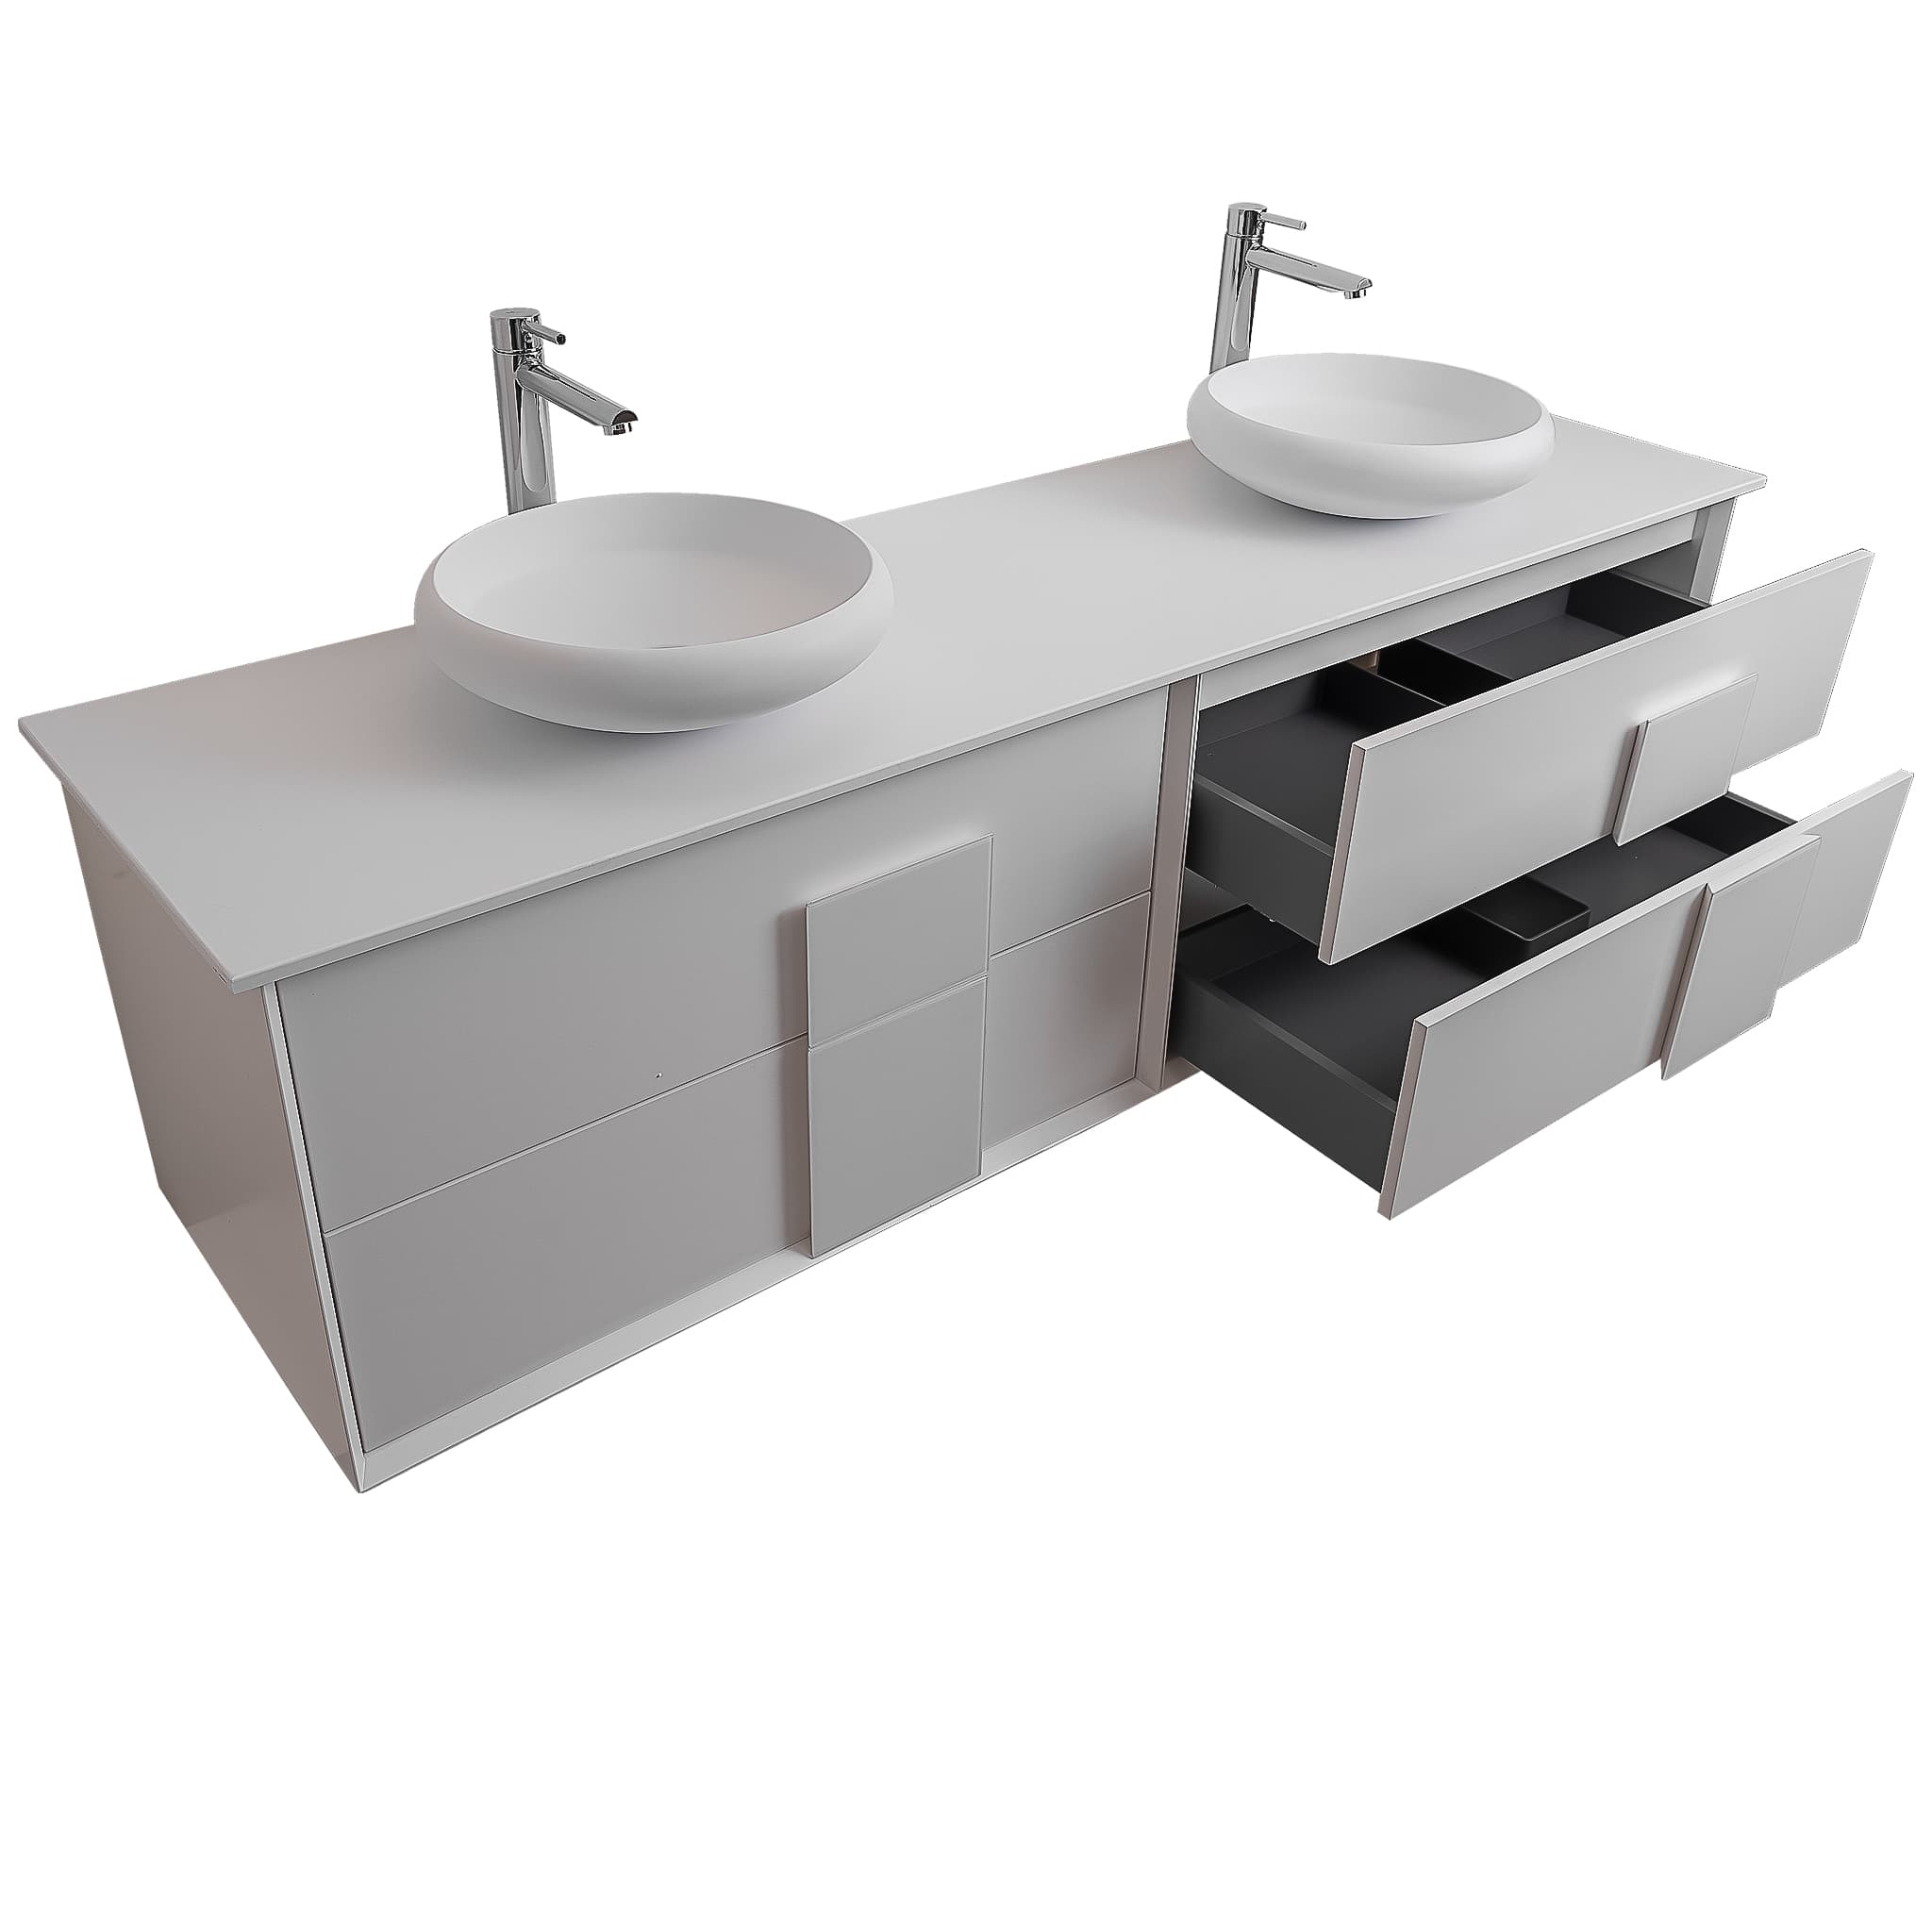 Piazza 63 Matte White With White Handle Cabinet, Solid Surface Flat White Counter and Two Round Solid Surface White Basin 1153, Wall Mounted Modern Vanity Set